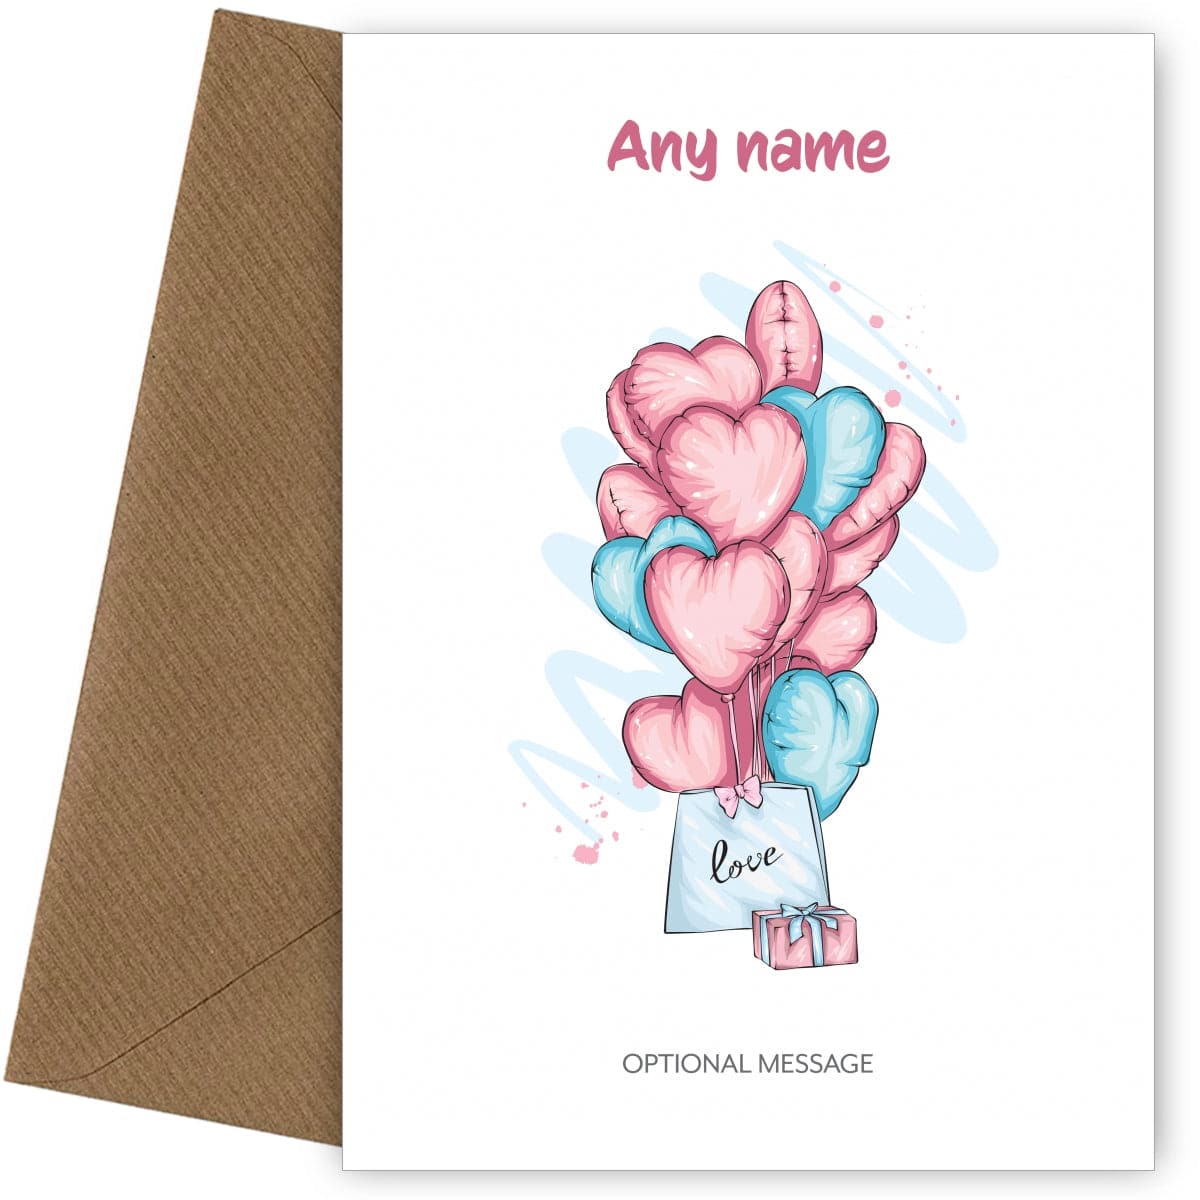 Personalised Girls Birthday Cards - Pretty Balloon and Gift Set